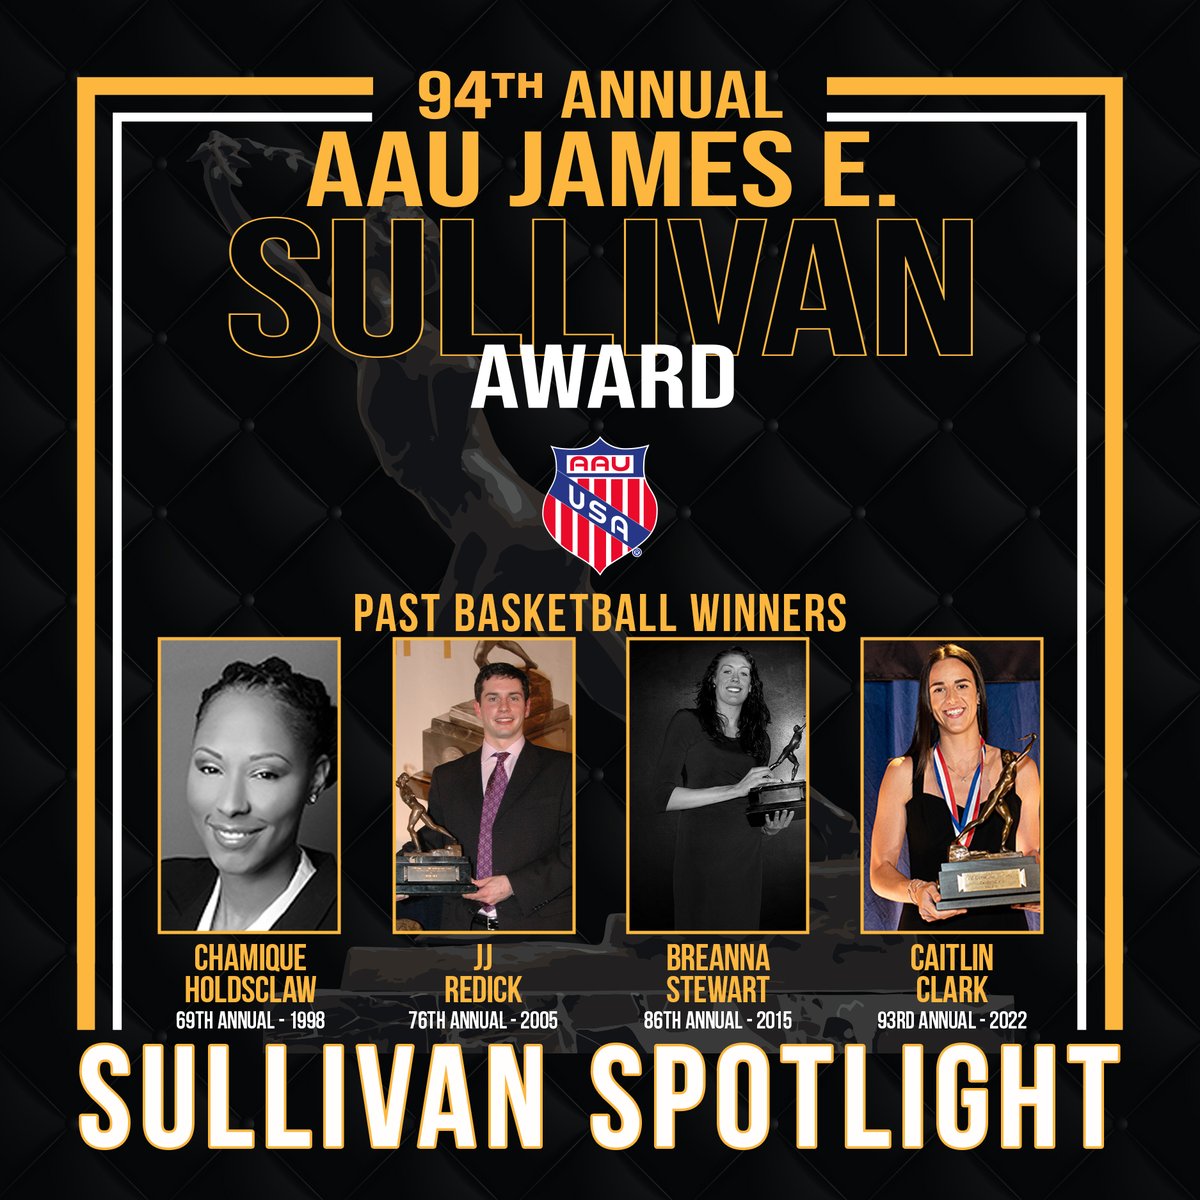 Not 1, not 2, nope, not even 3 but 8 AAU Sullivan award recipients have come from the sport of basketball ❗ 🏀 Read all about it here: bit.ly/43xjtxC